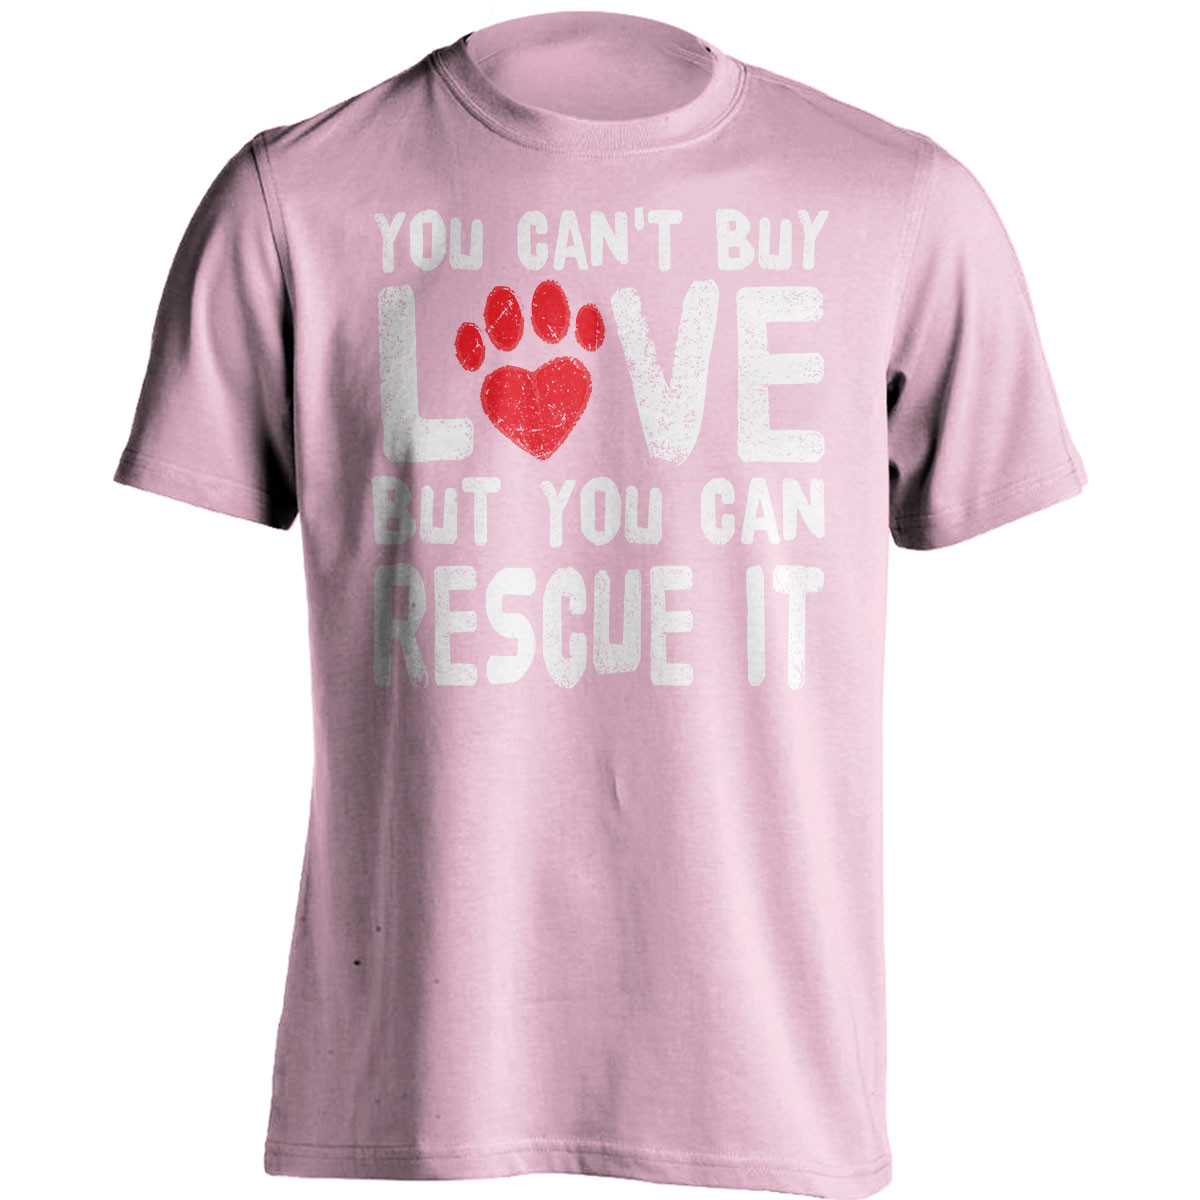 You Can't Buy Love, Dog Rescue T-Shirt